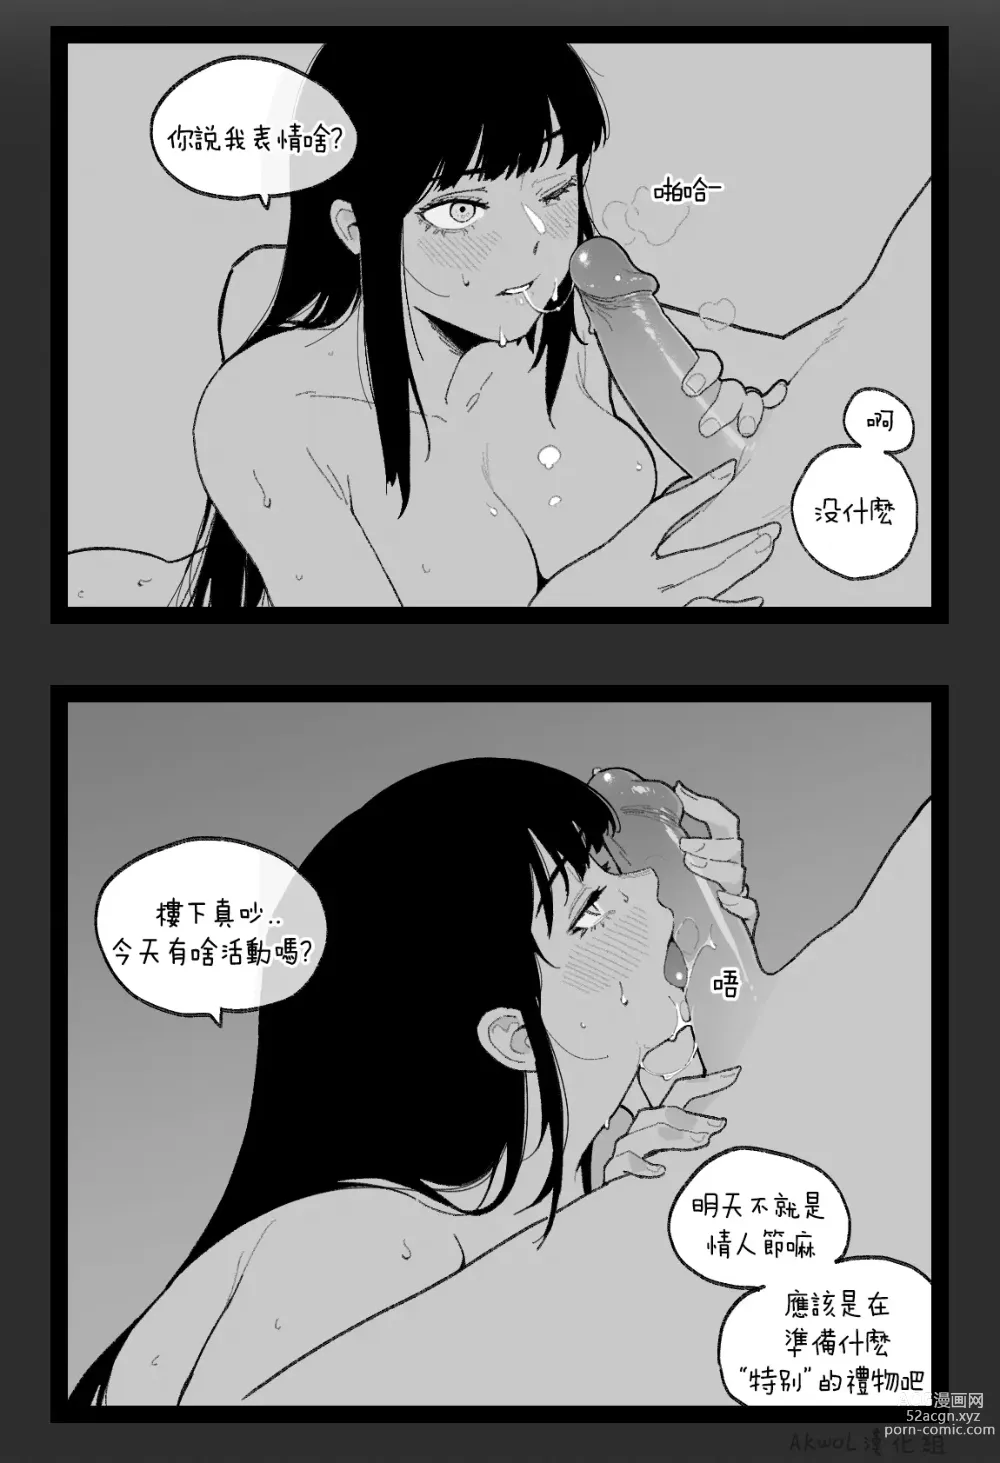 Page 32 of doujinshi valentine day part1-2 + SCR (decensored)